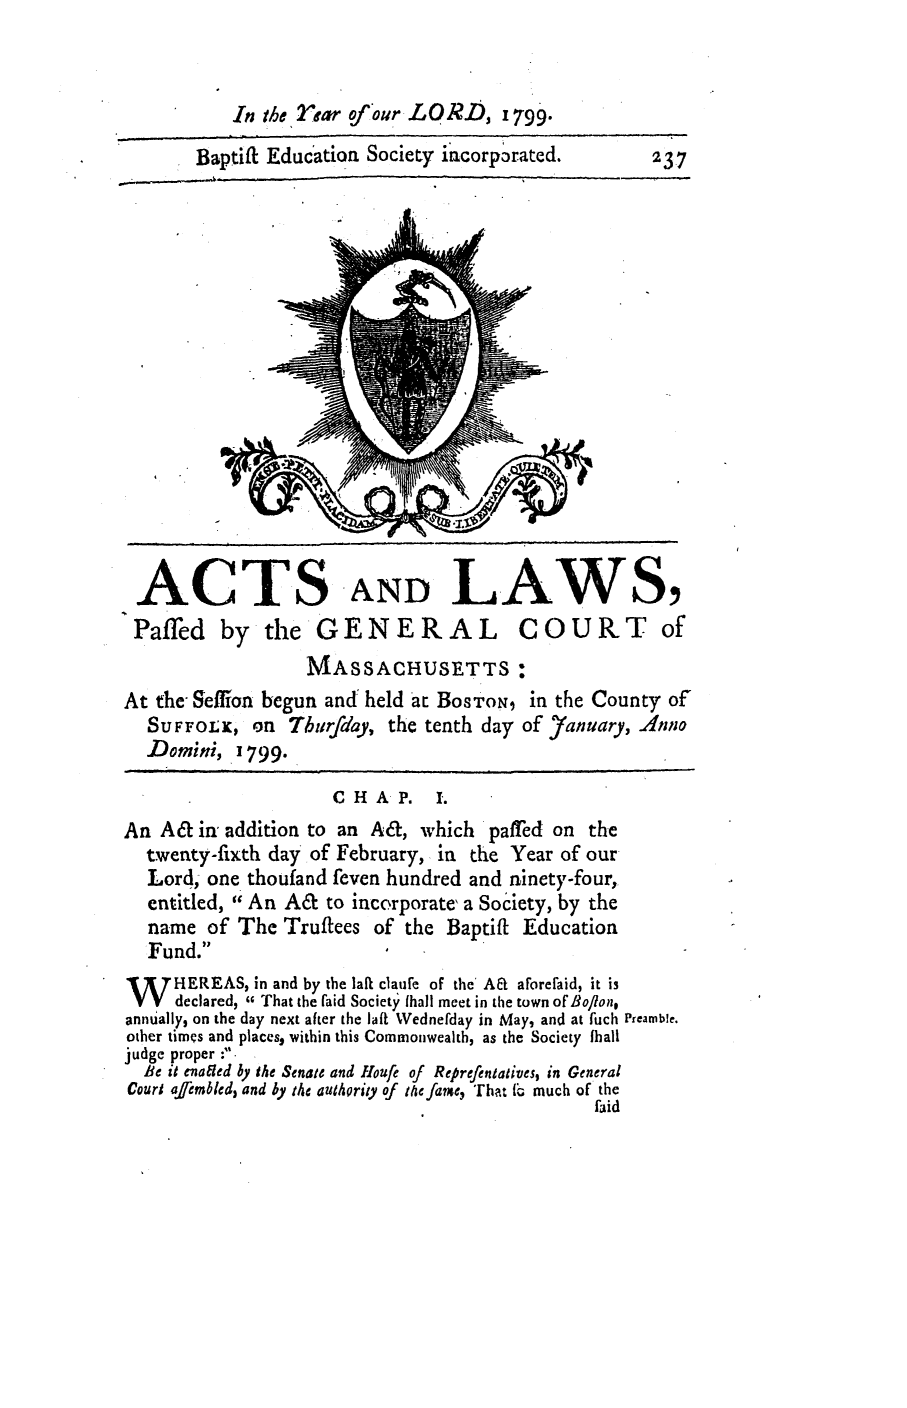 handle is hein.ssl/ssma0346 and id is 1 raw text is: In the Ifrear ofour LORD, 1799.
Baptift Educatioa Society iacorporated.        237
ACTS AND LAWS,
Paffed by the GENERAL COURT of
MASSACHUSETTS:
At the Seffion begun and held at BosToN, in the County of
SUFFOLK, on Tburfday, the tenth day of Yanuary, .Anno
Domini, 1799.
C H AP. 1.
An A& in addition to an A&, which paffed on the
twenty-fixth day of February, in the Year of our
Lord; one thoufand feven hundred and ninety-four,
entitled, An A& to incorporate' a Society, by the
name of The Trutees of the Baptift Education
Fund.
W HEREAS, in and by the lafl clautie of the' AE aForefaid, it is
V   declared,  That the aid Society hall meet in the town of Boflon,
annually, on the day next after the lafi Wednefday in May, and at fuch Preamble.
other times and places, within this Commonwealth, as the Society fhall
judge proper ; -
ie t enailed by the Senate and Houfe of Reprefentatives, in General
Court afrembled, and by the authority of te fame, 'That f1 much of the
faid


